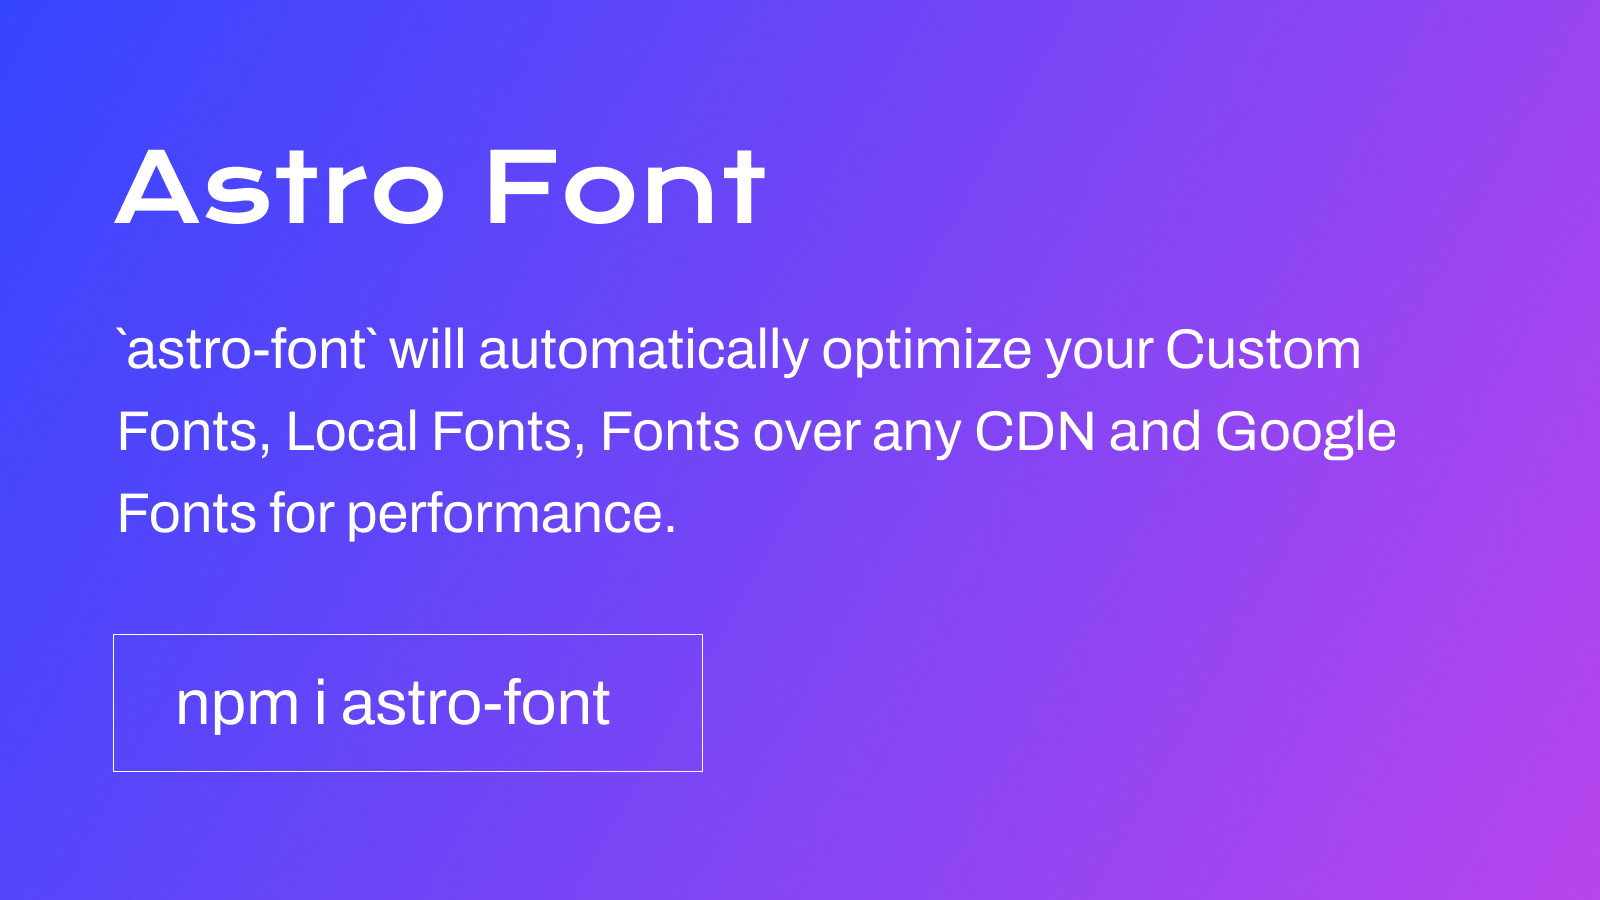 astro-font by LaunchFa.st